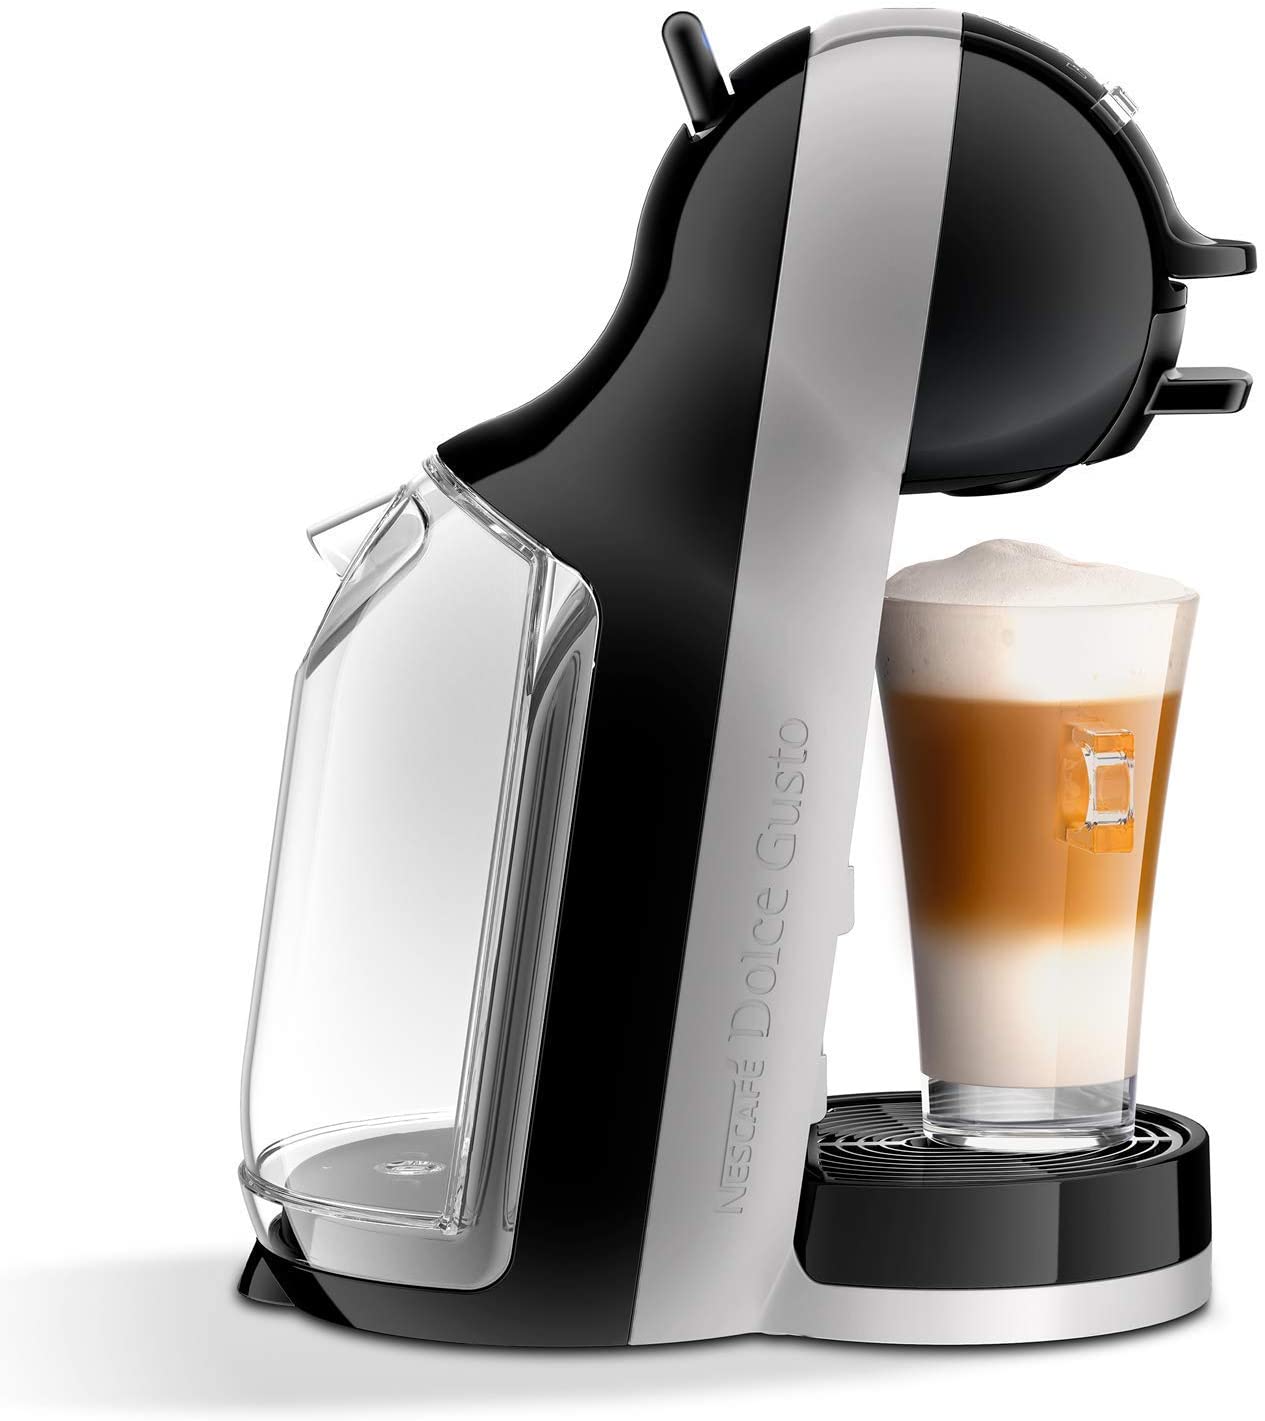 Nescafé Dolce Gusto launches its most sustainable system to date